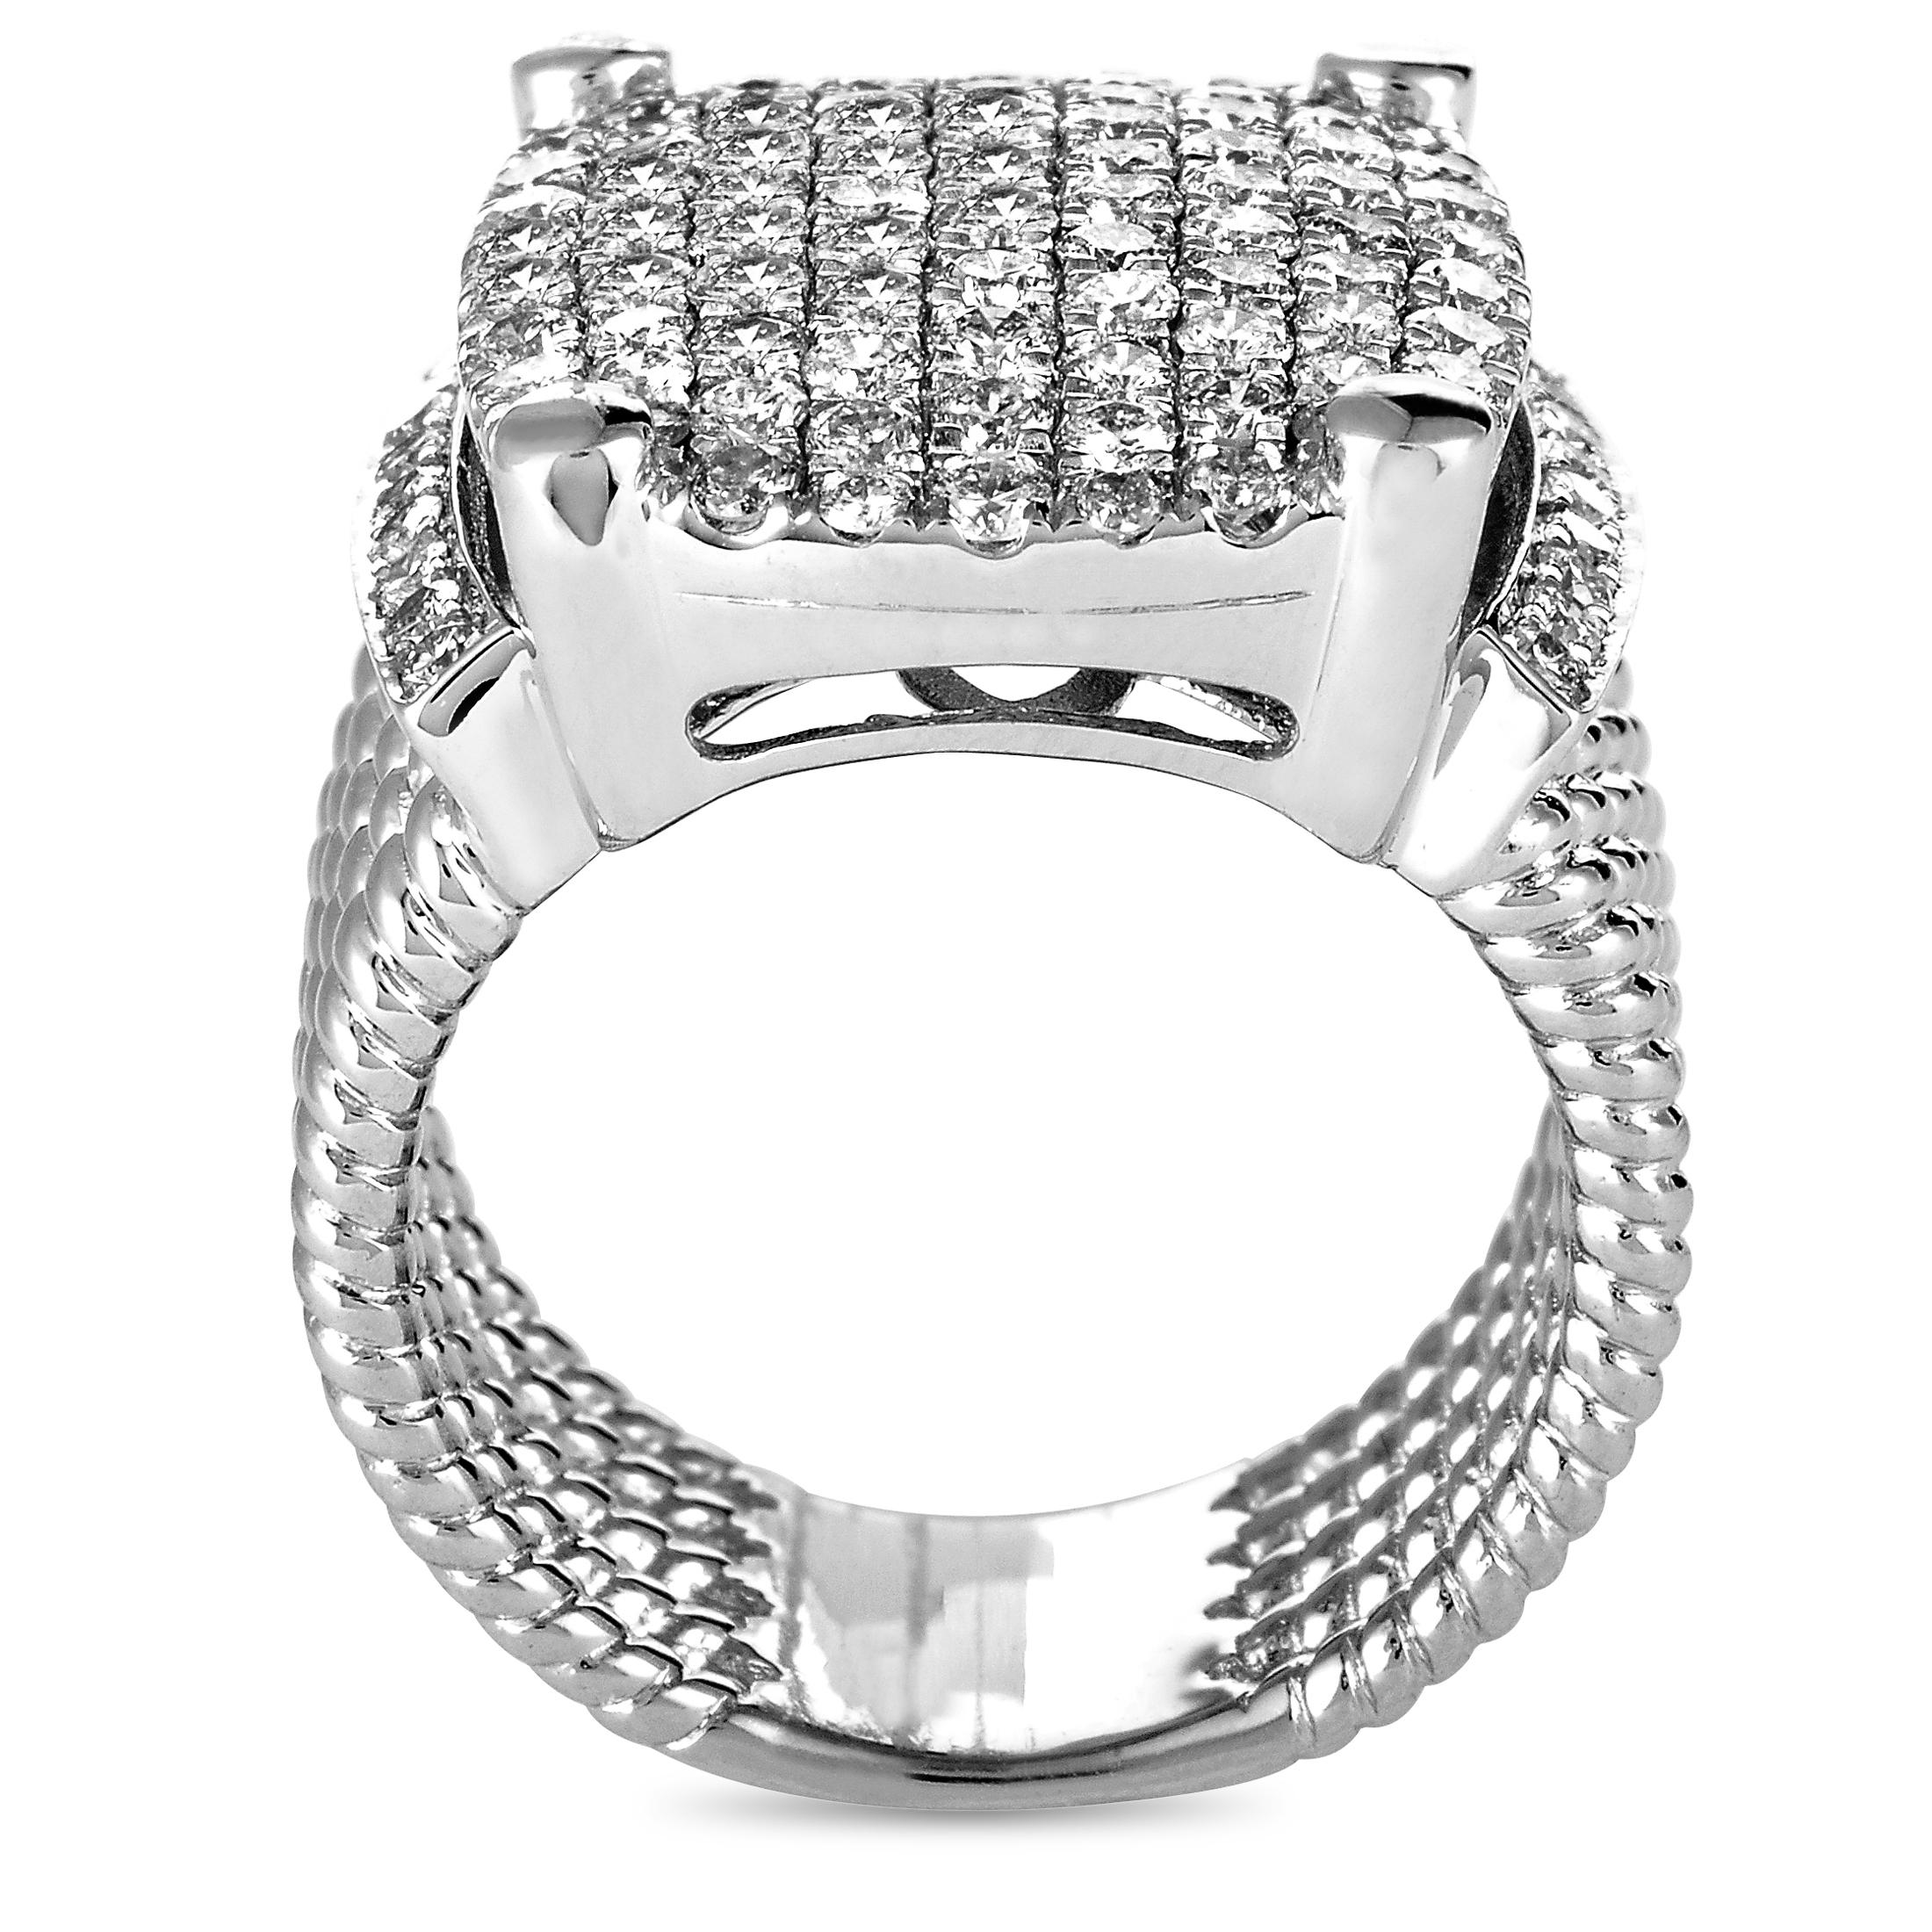 This LB Exclusive ring is crafted from 18K white gold and weighs 14.2 grams, boasting a total of 1.91 carats of diamonds. Band thickness and ring top height measure 10 and 6 mm respectively, while ring top dimensions are 20 by 18 mm.

Offered in